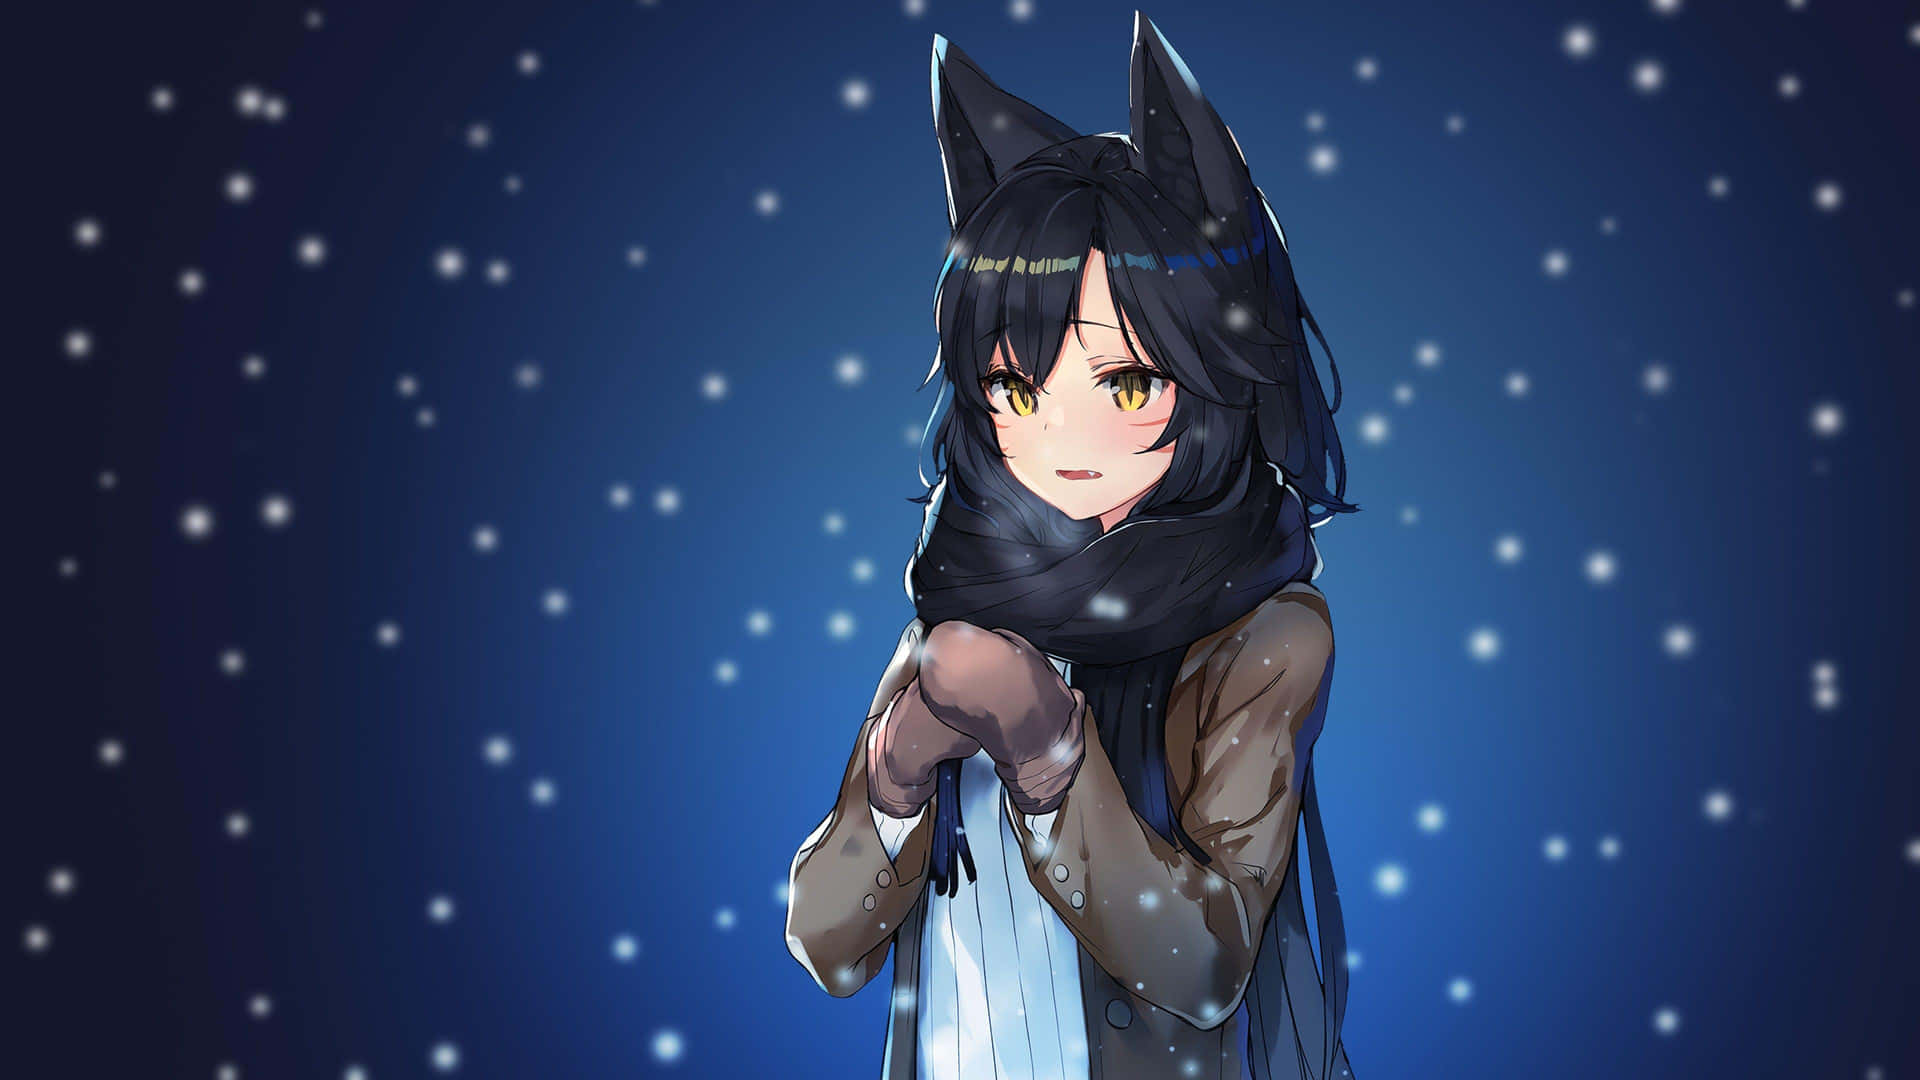 Download Cute Anime Wolf Girl In The Snow Wallpaper | Wallpapers.com